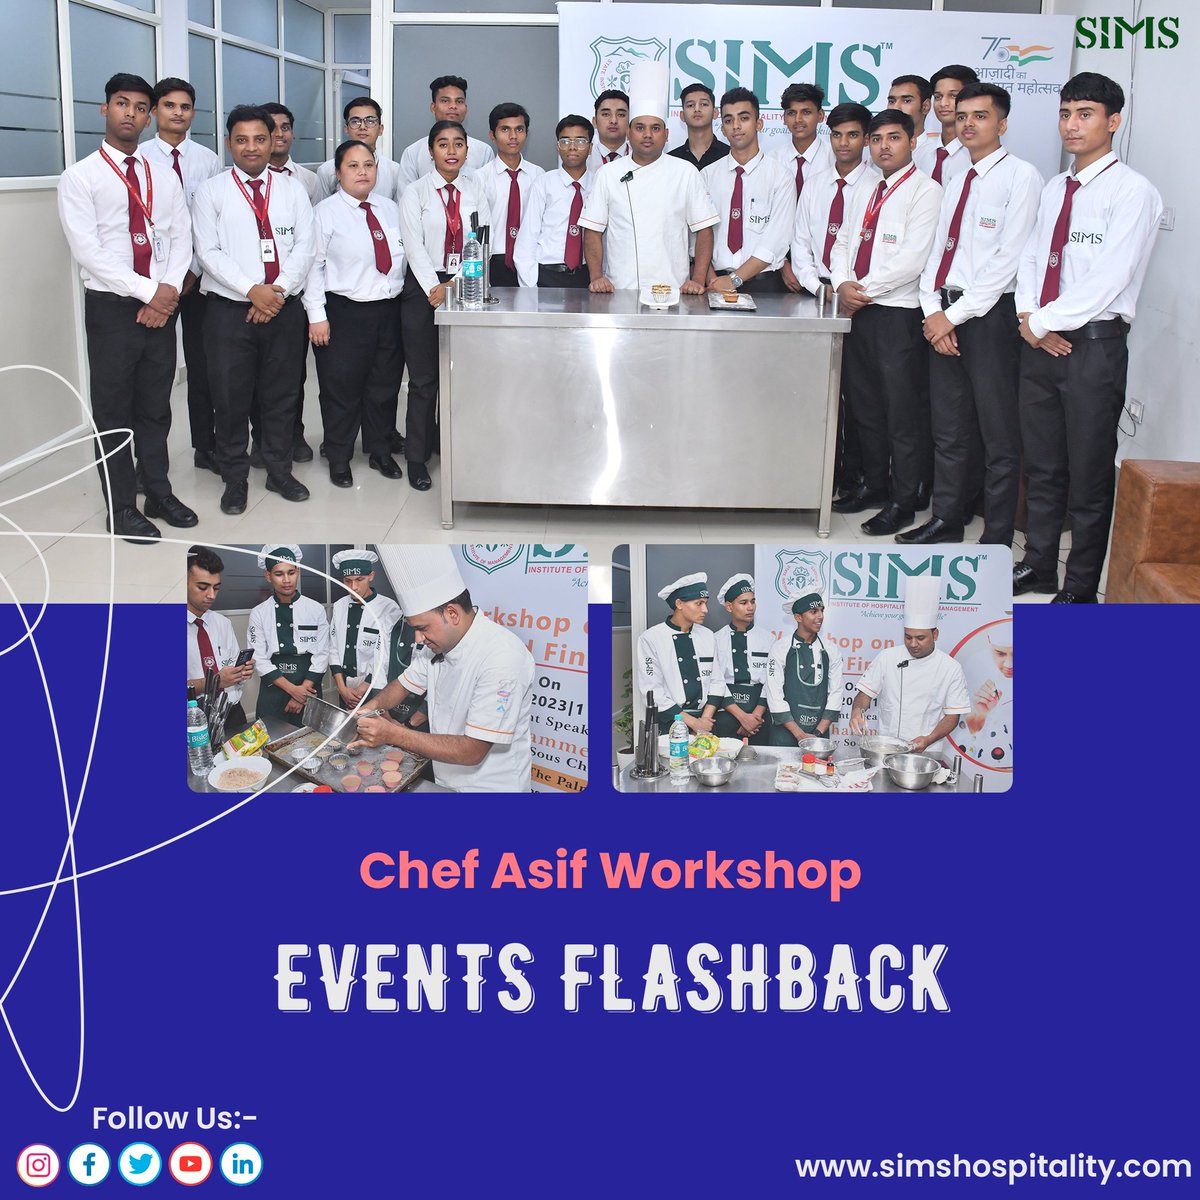 Flashback to the Chef Asif Workshop! 🍳✨ Remembering the culinary magic at SIMS Institute of Hotel Management.

Admission now open for Degree and Diploma courses! 🎓
Visit us at simhospitality.com

#cheflife #culinarymagic #admissionopen